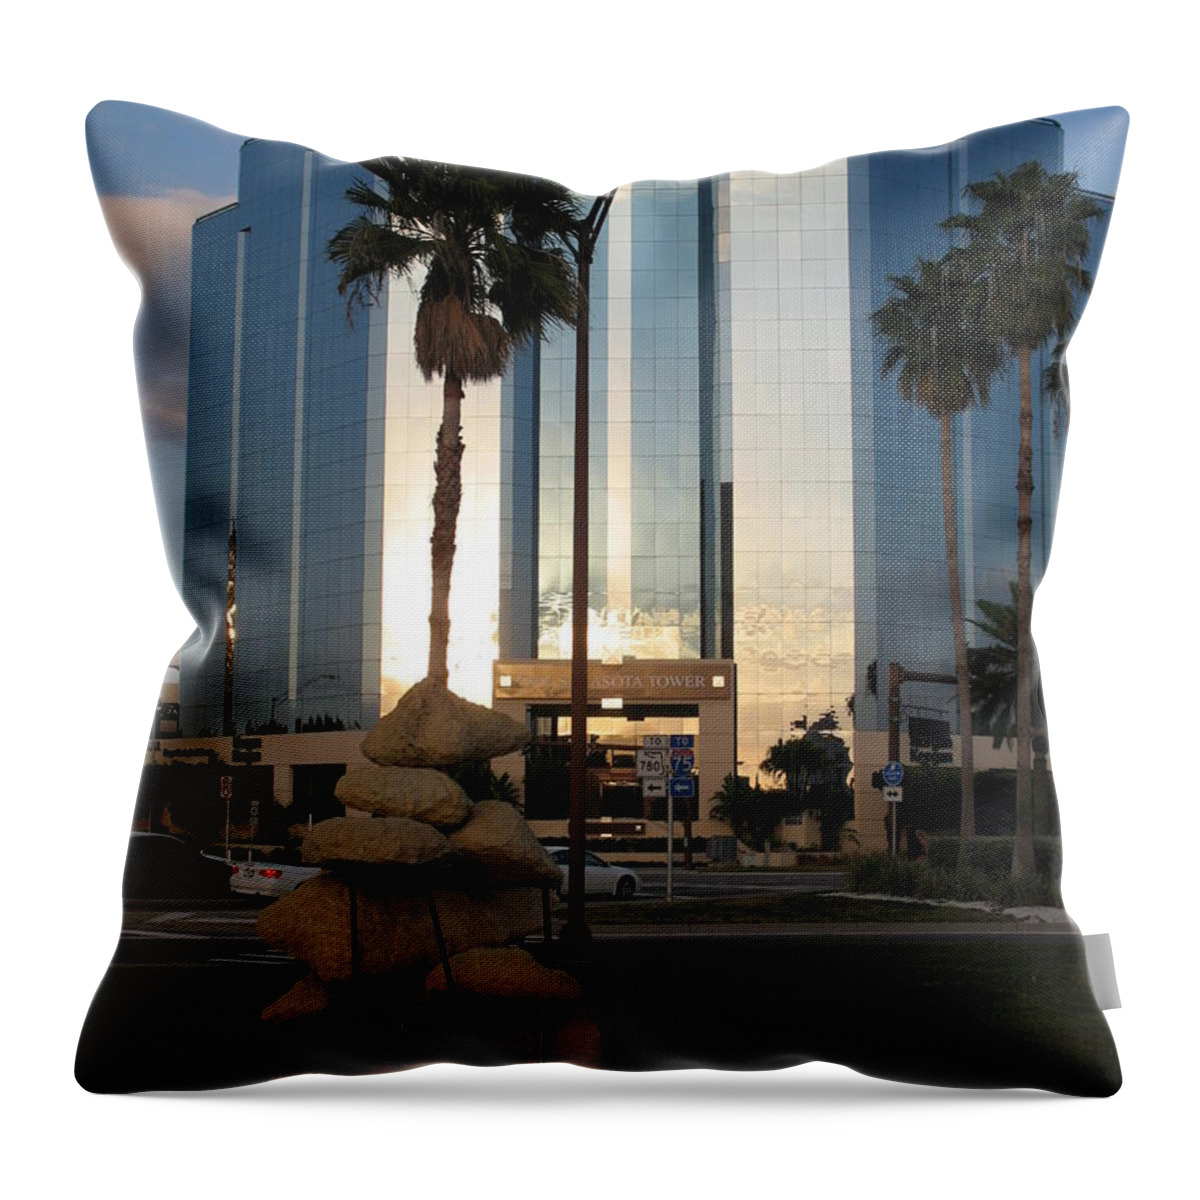 Art Throw Pillow featuring the photograph Sarasota Waterfront - Art 2010 by Christiane Schulze Art And Photography